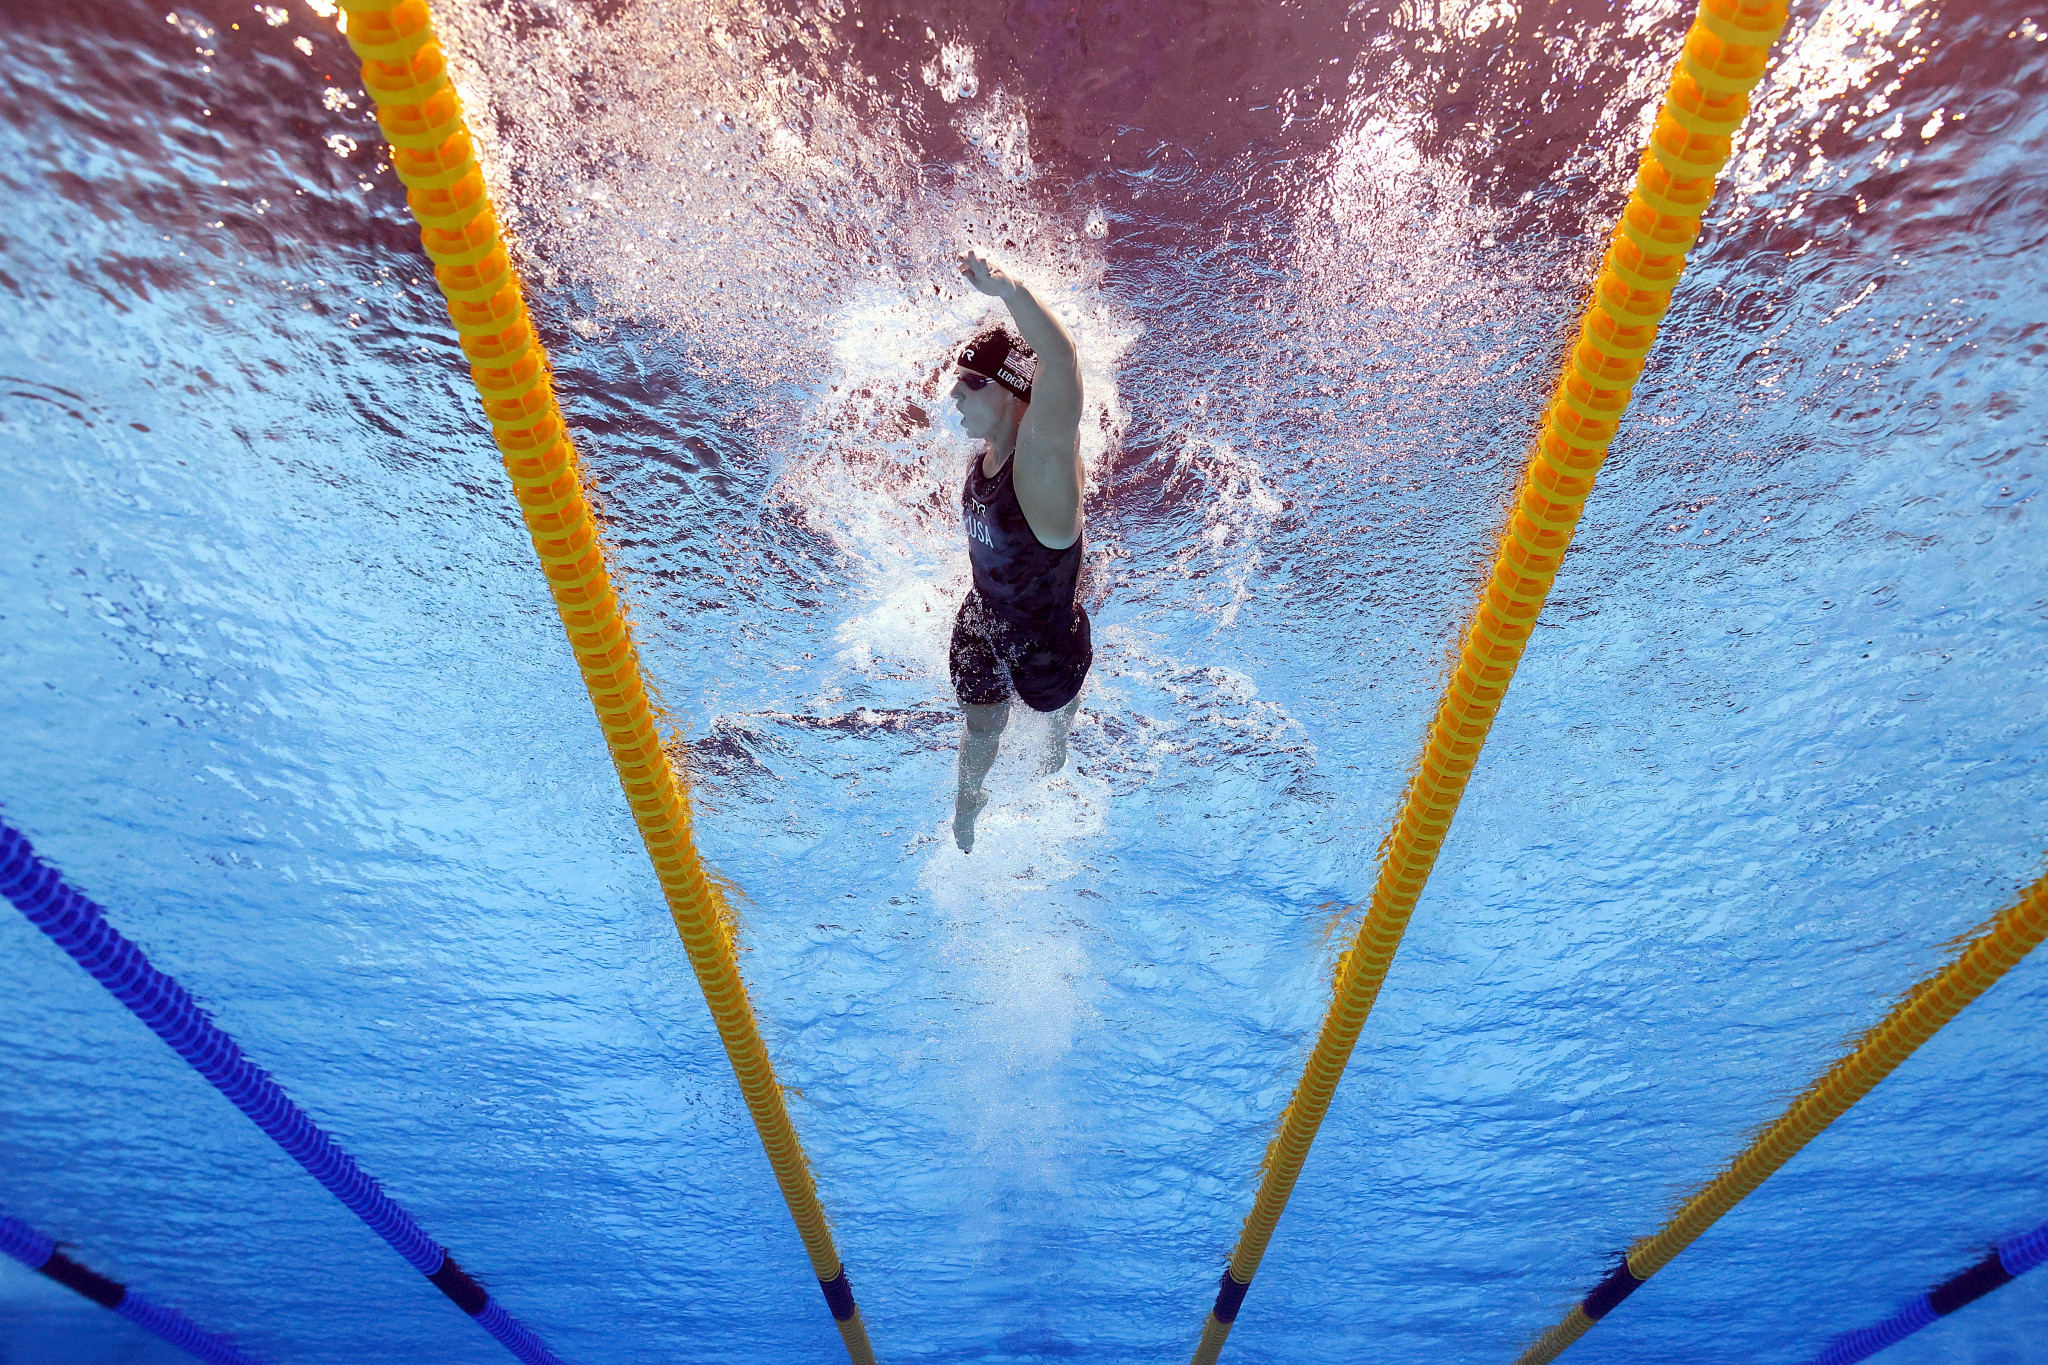 The United States' Katie Ledecky dominated the women's 1,500m freestyle and won the final by more than 14 seconds ©Getty Images